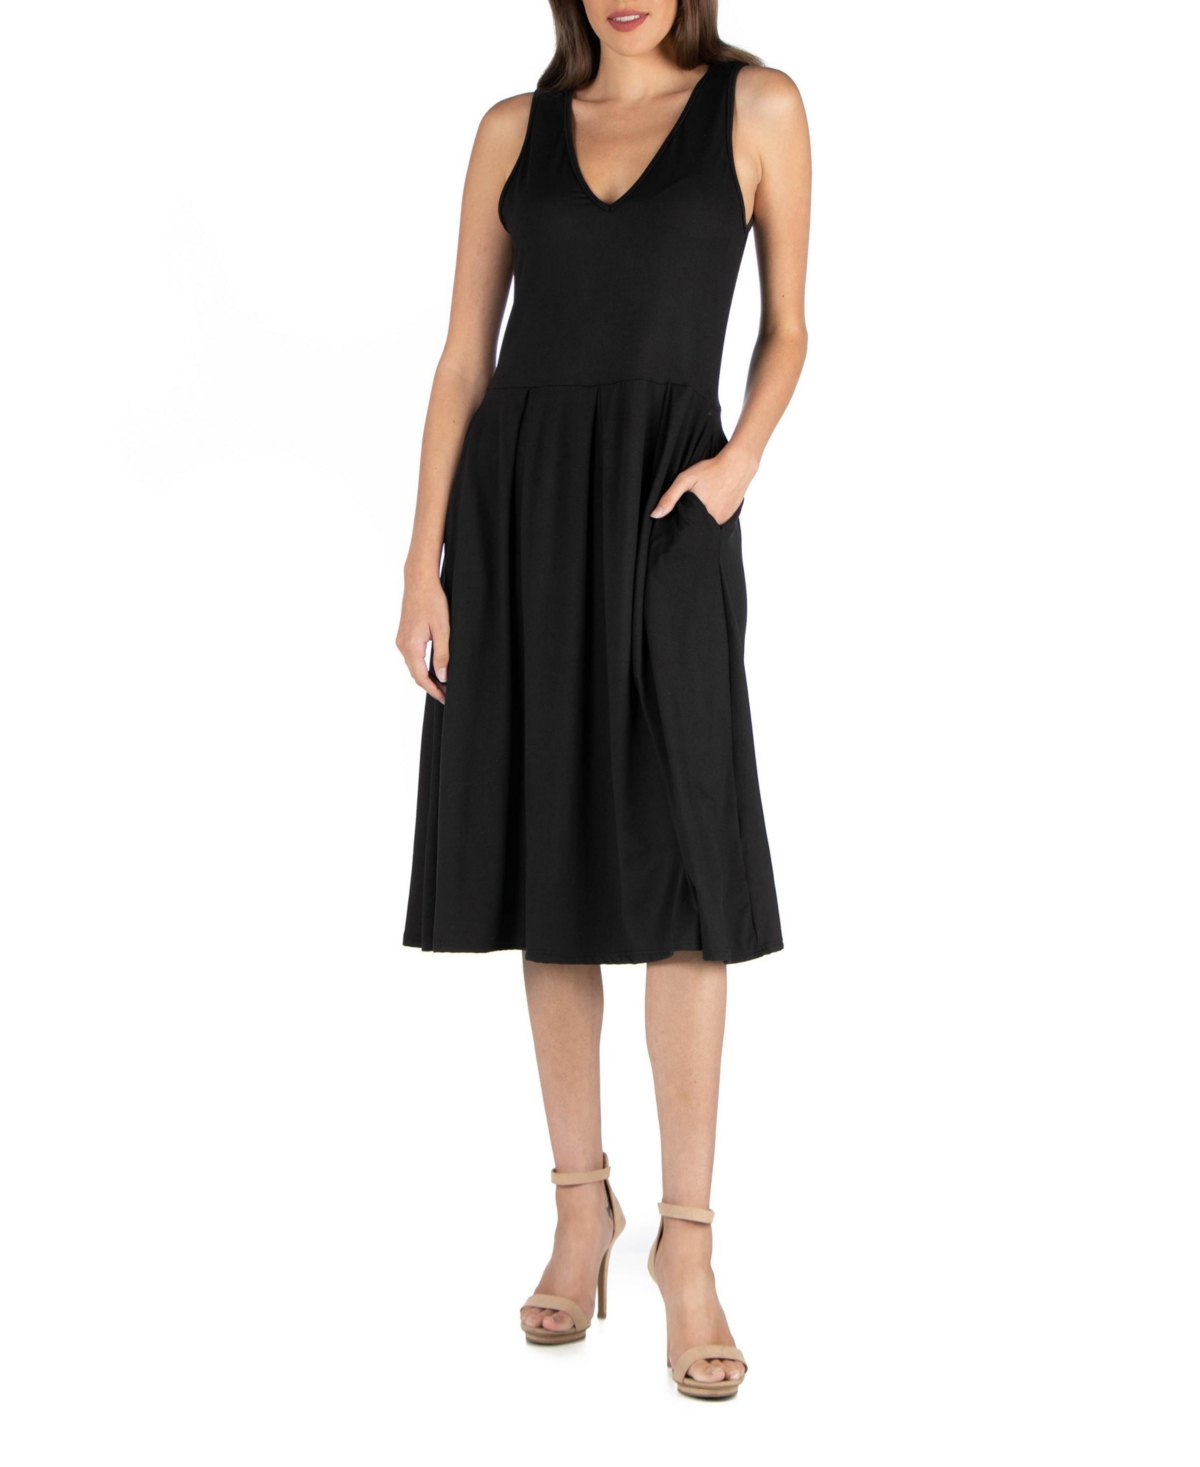 24SEVEN COMFORT APPAREL WOMEN'S FIT AND FLARE MIDI SLEEVELESS DRESS WITH POCKET DETAIL